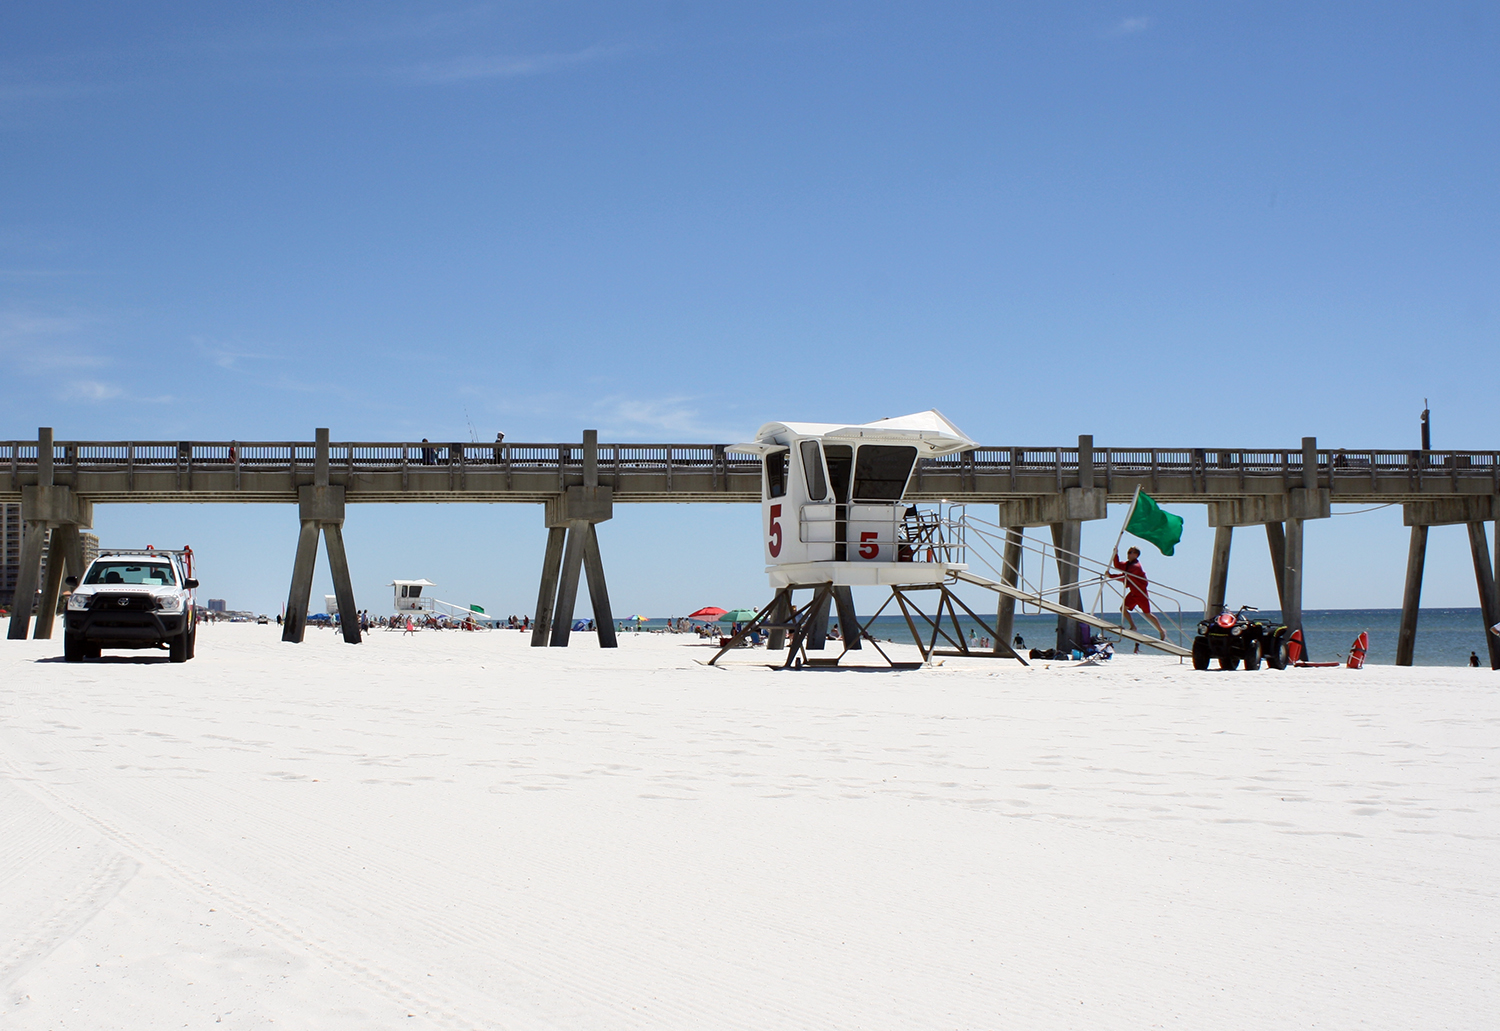 Pensacola Beach Lifeguards setting up for the day